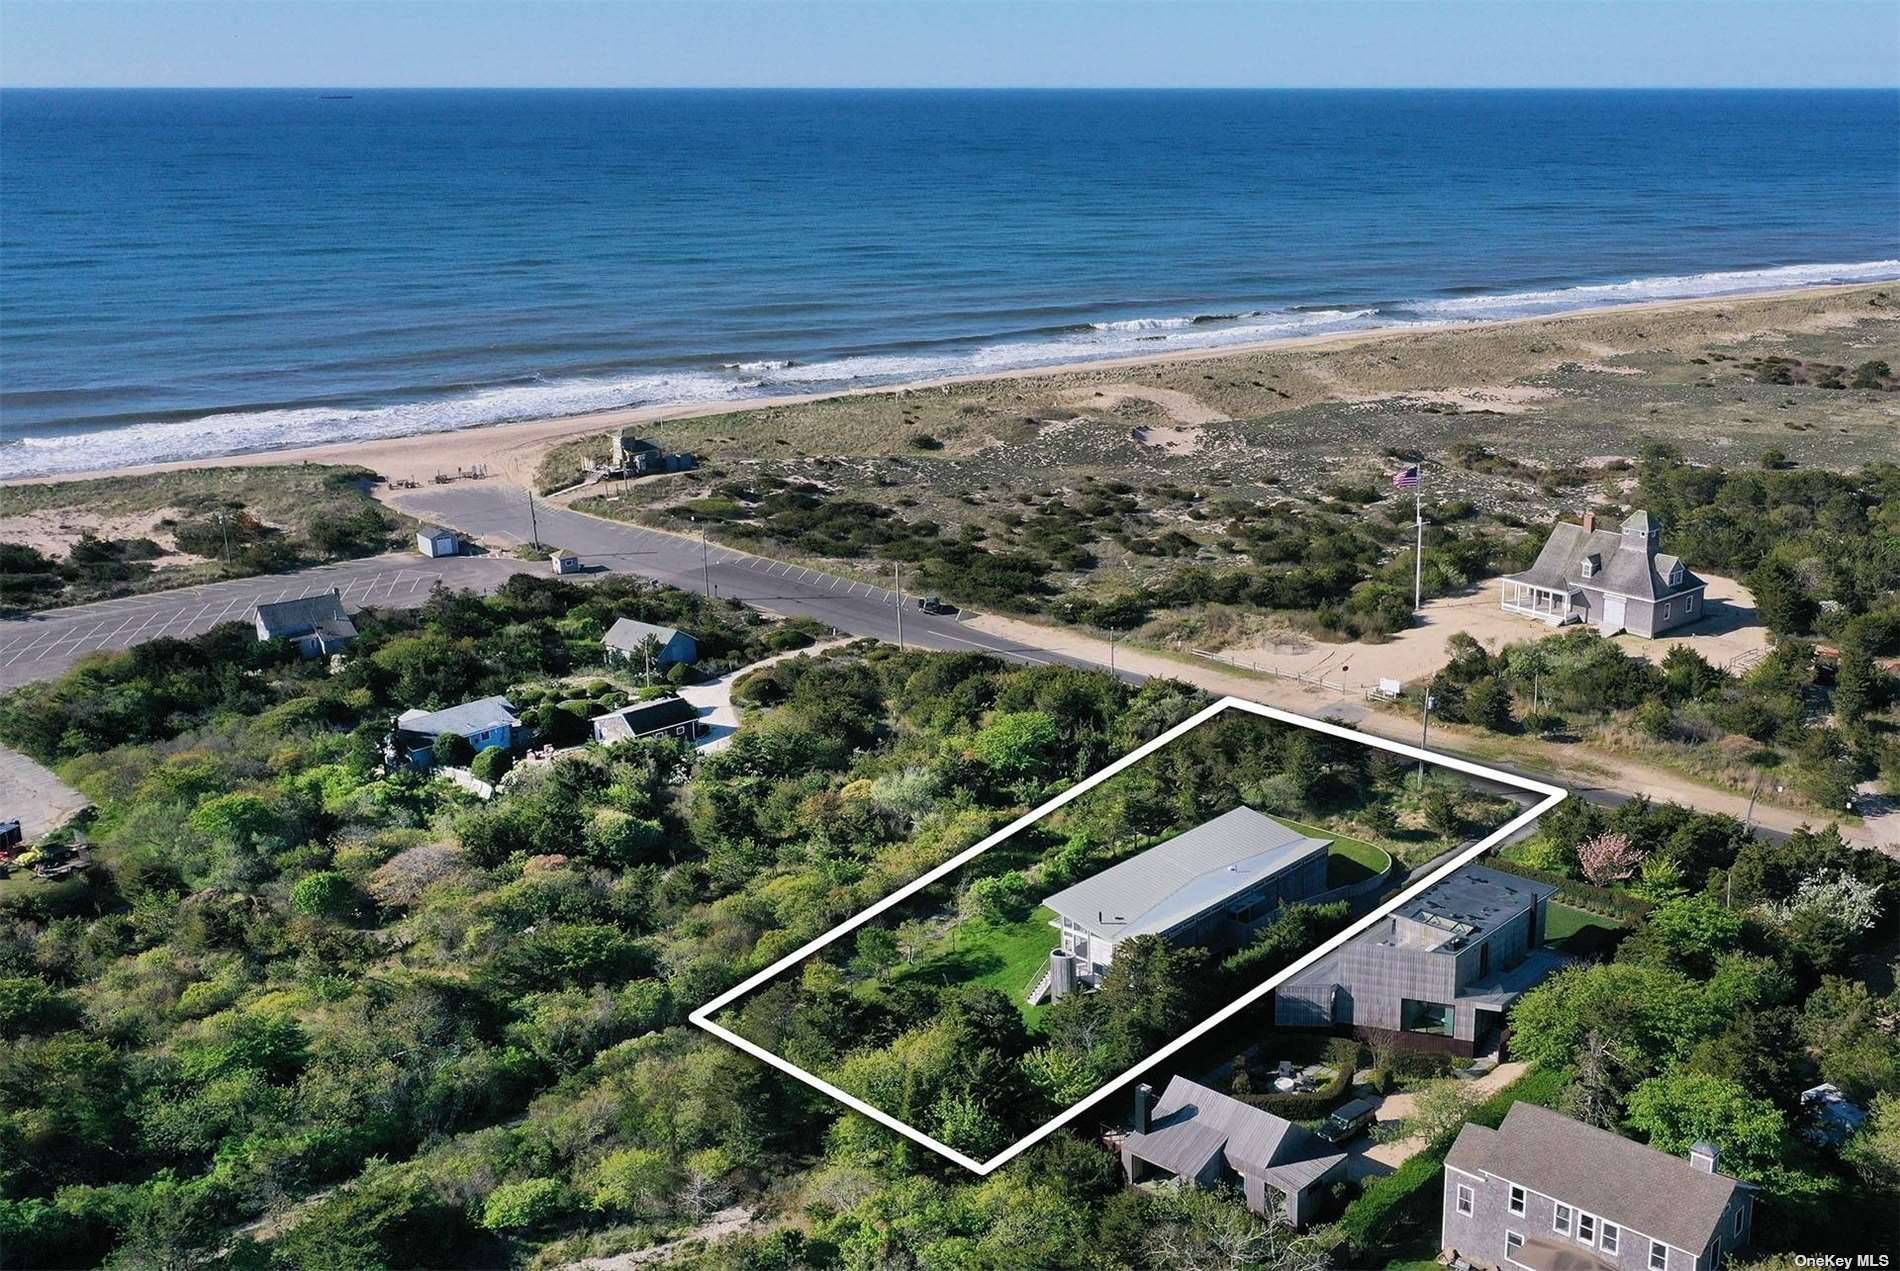 Recently refreshed and updated with a new chef's kitchen, this Modern Beach Cottage is located only 3 houses from the Atlantic Ocean in Amagansett, and was designed by award winning ...